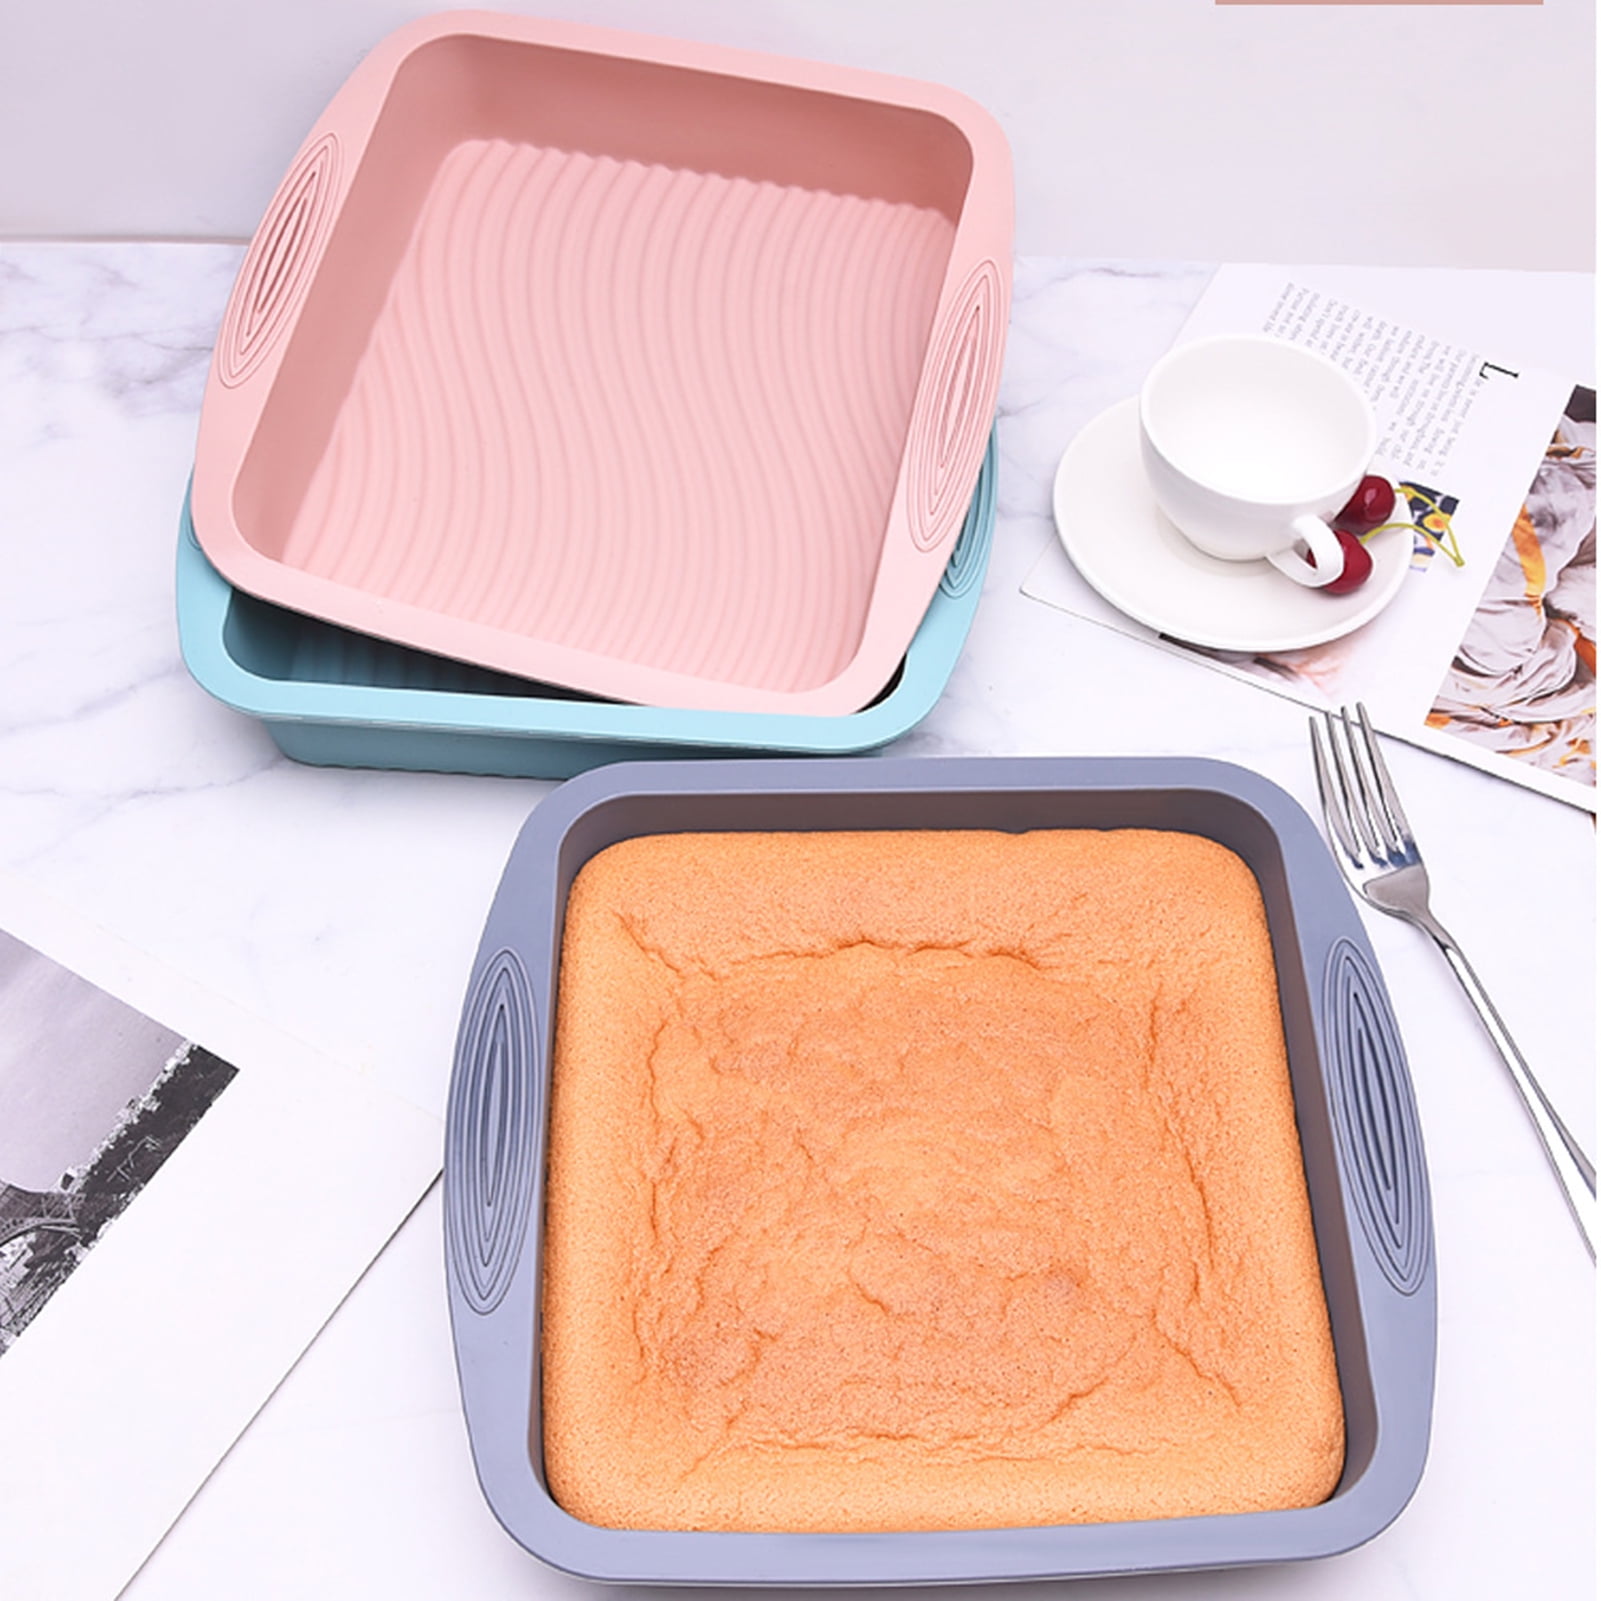 COOKSTYLE 8x8 Baking Pan, 2 Pack Silicone Pans for Baking, Brownie Pan with  Silicone Spatulas Pastry Brush, Silicone Baking Pan for Brownies, Cakes